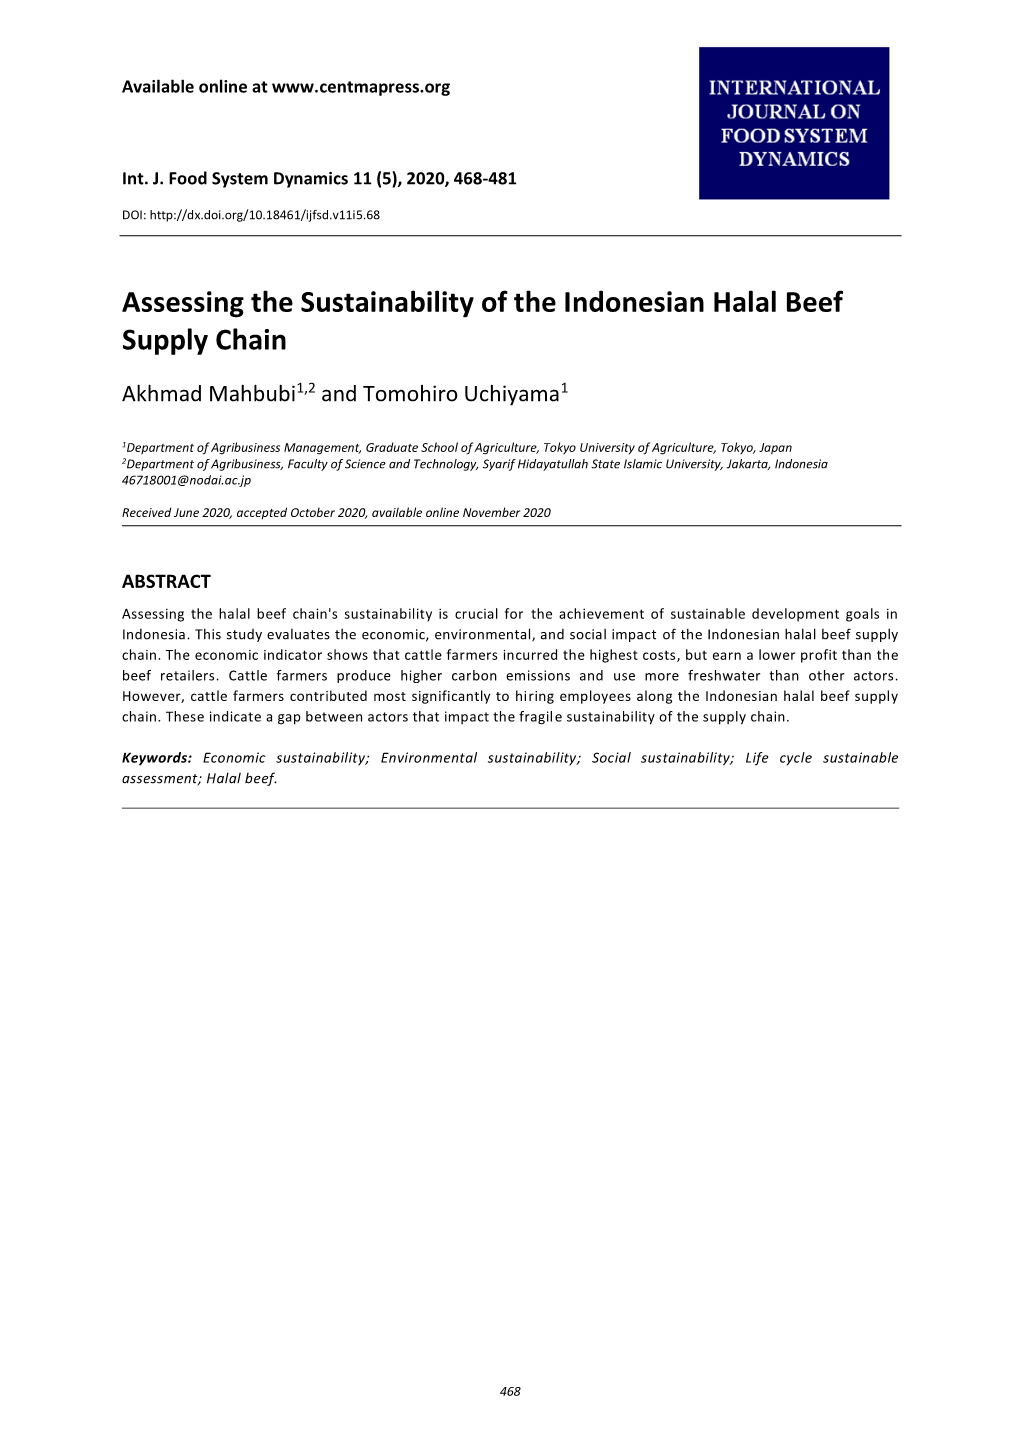 Assessing the Sustainability of the Indonesian Halal Beef Supply Chain